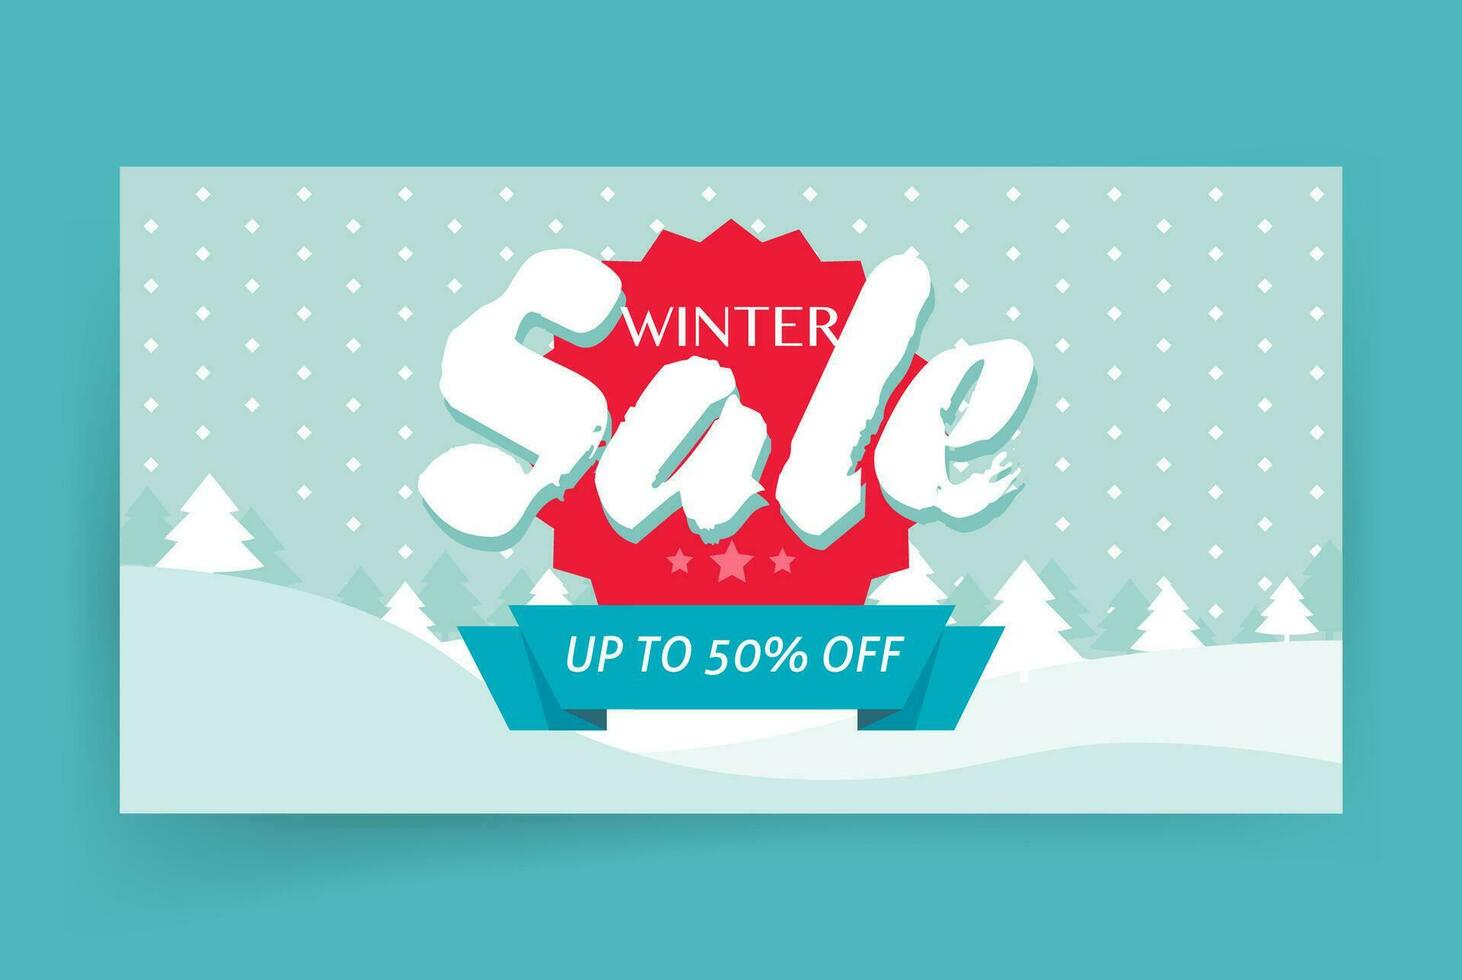 Winter sale or seasonal discount banner design vector illustration, flat cartoon promotion or clearance background template design and up to 50 percent off, clearance special offer for christmas